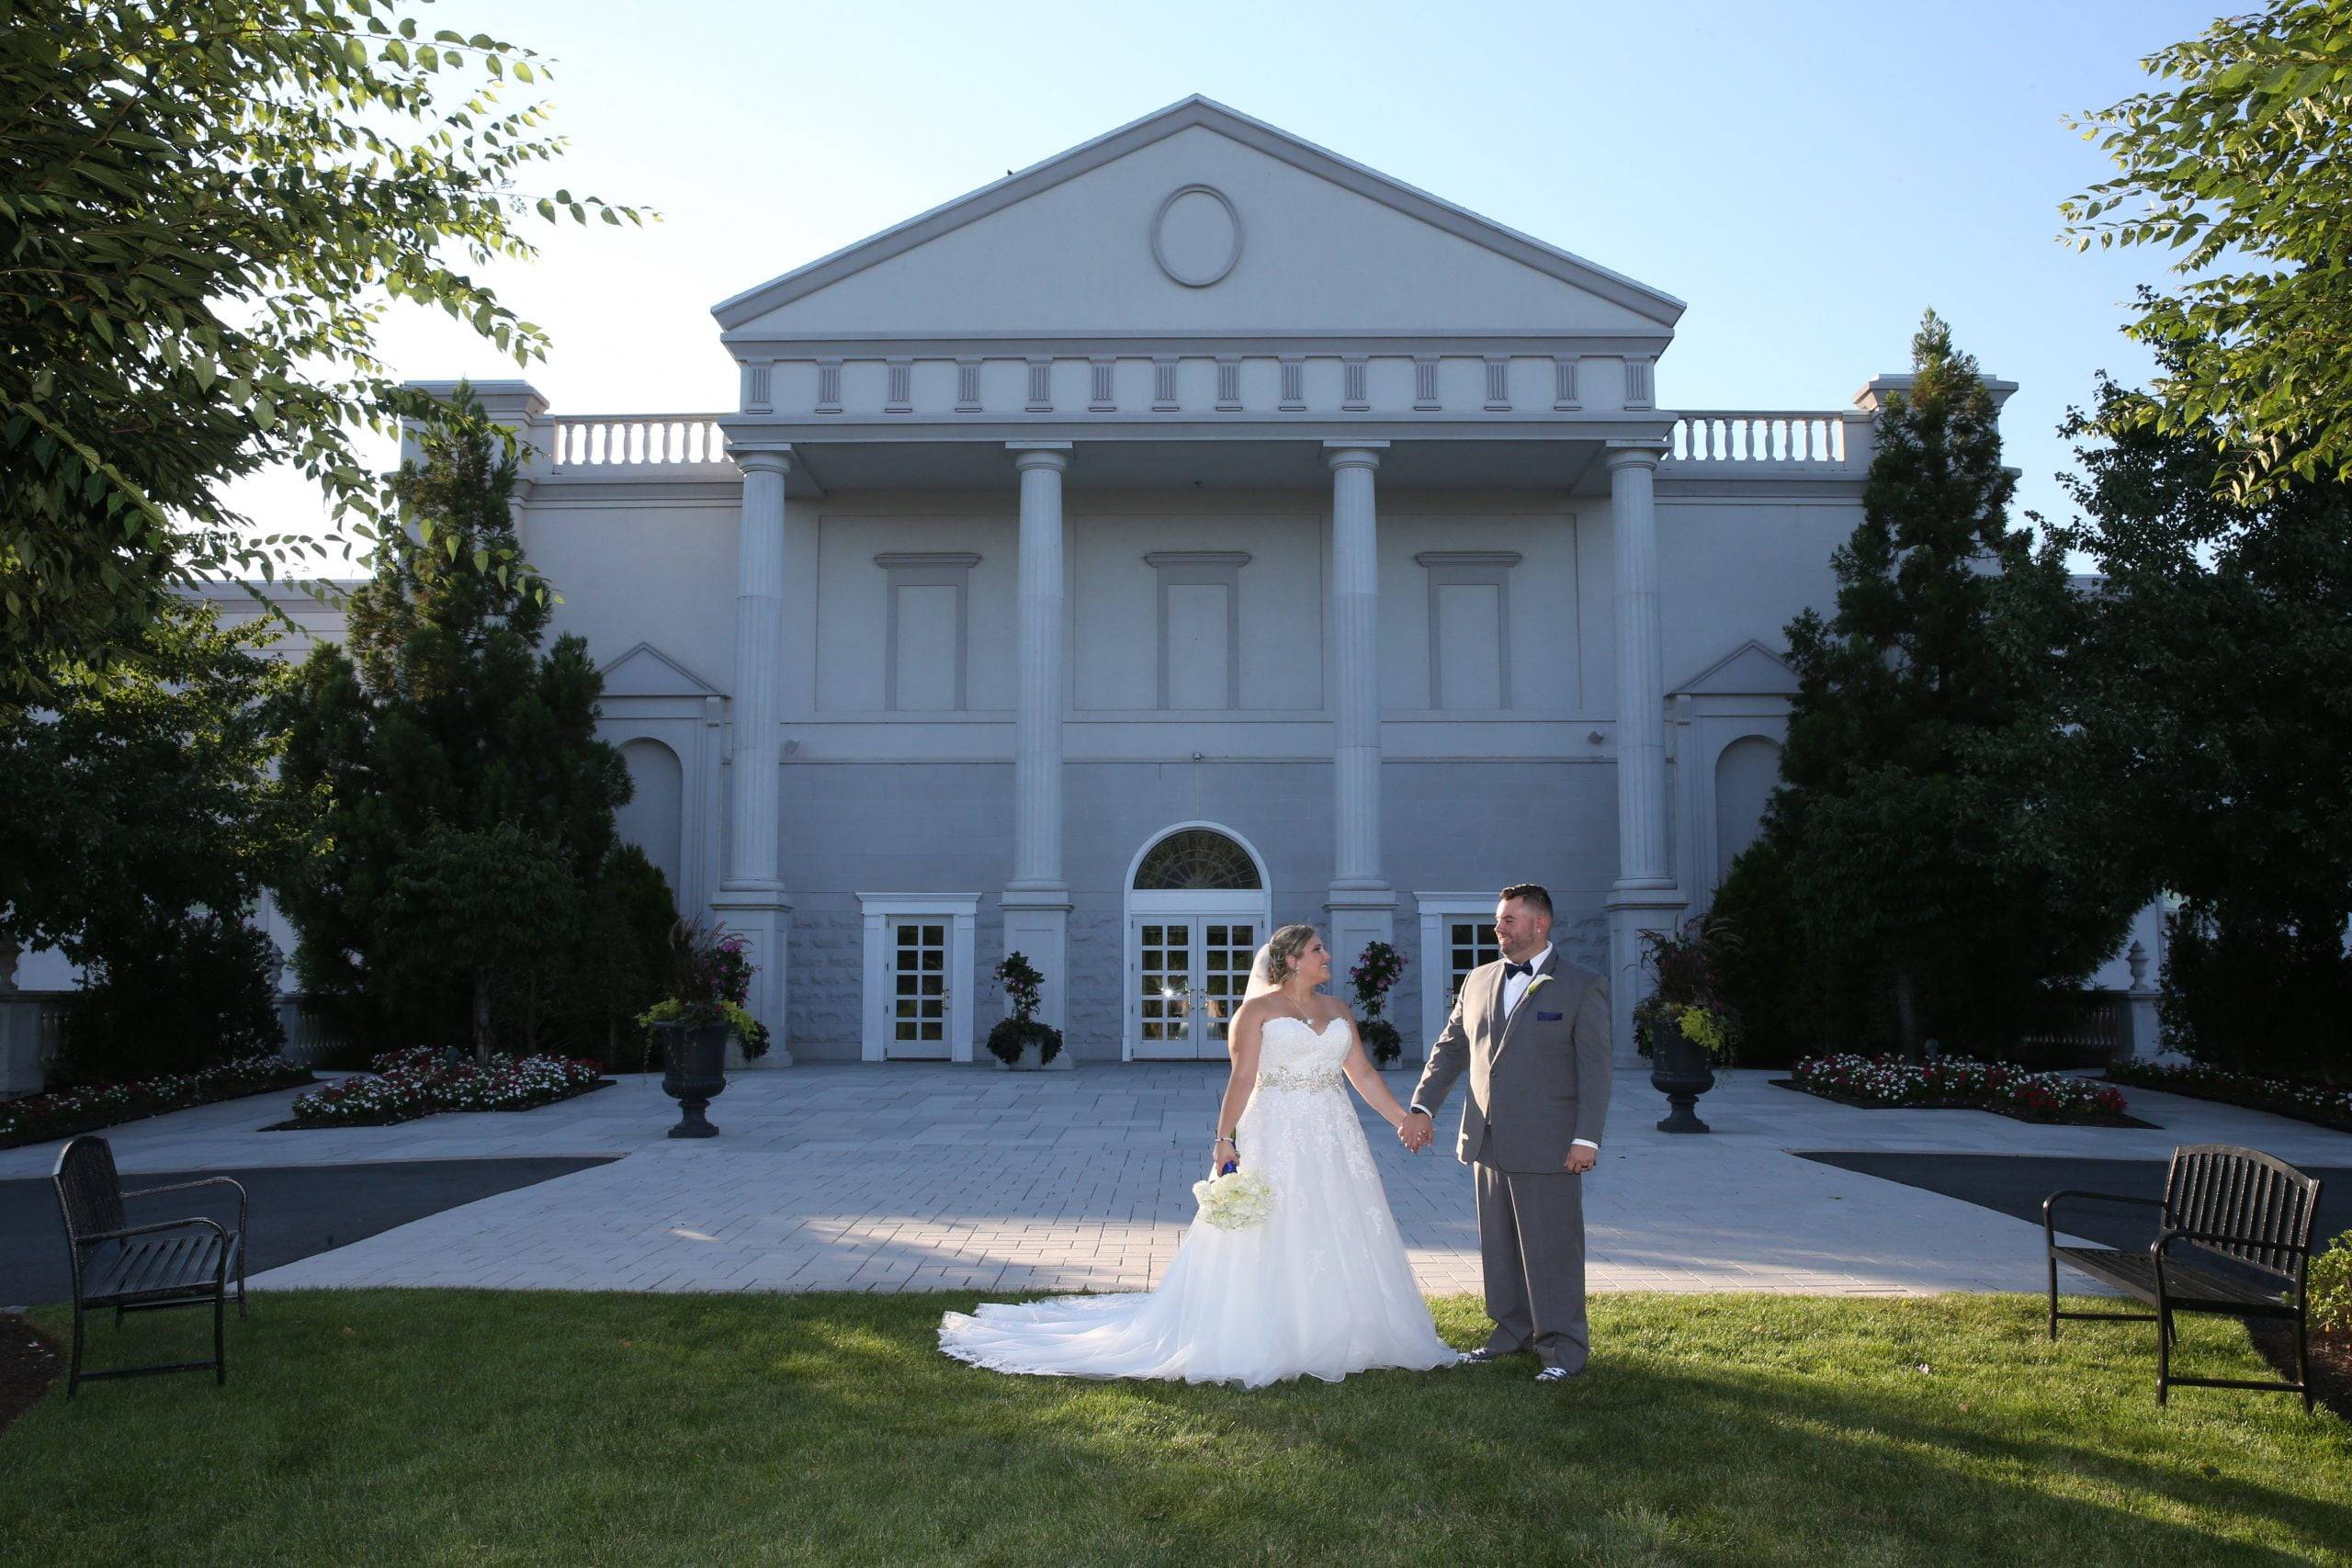 A bride and groom standing in front of a large white building.